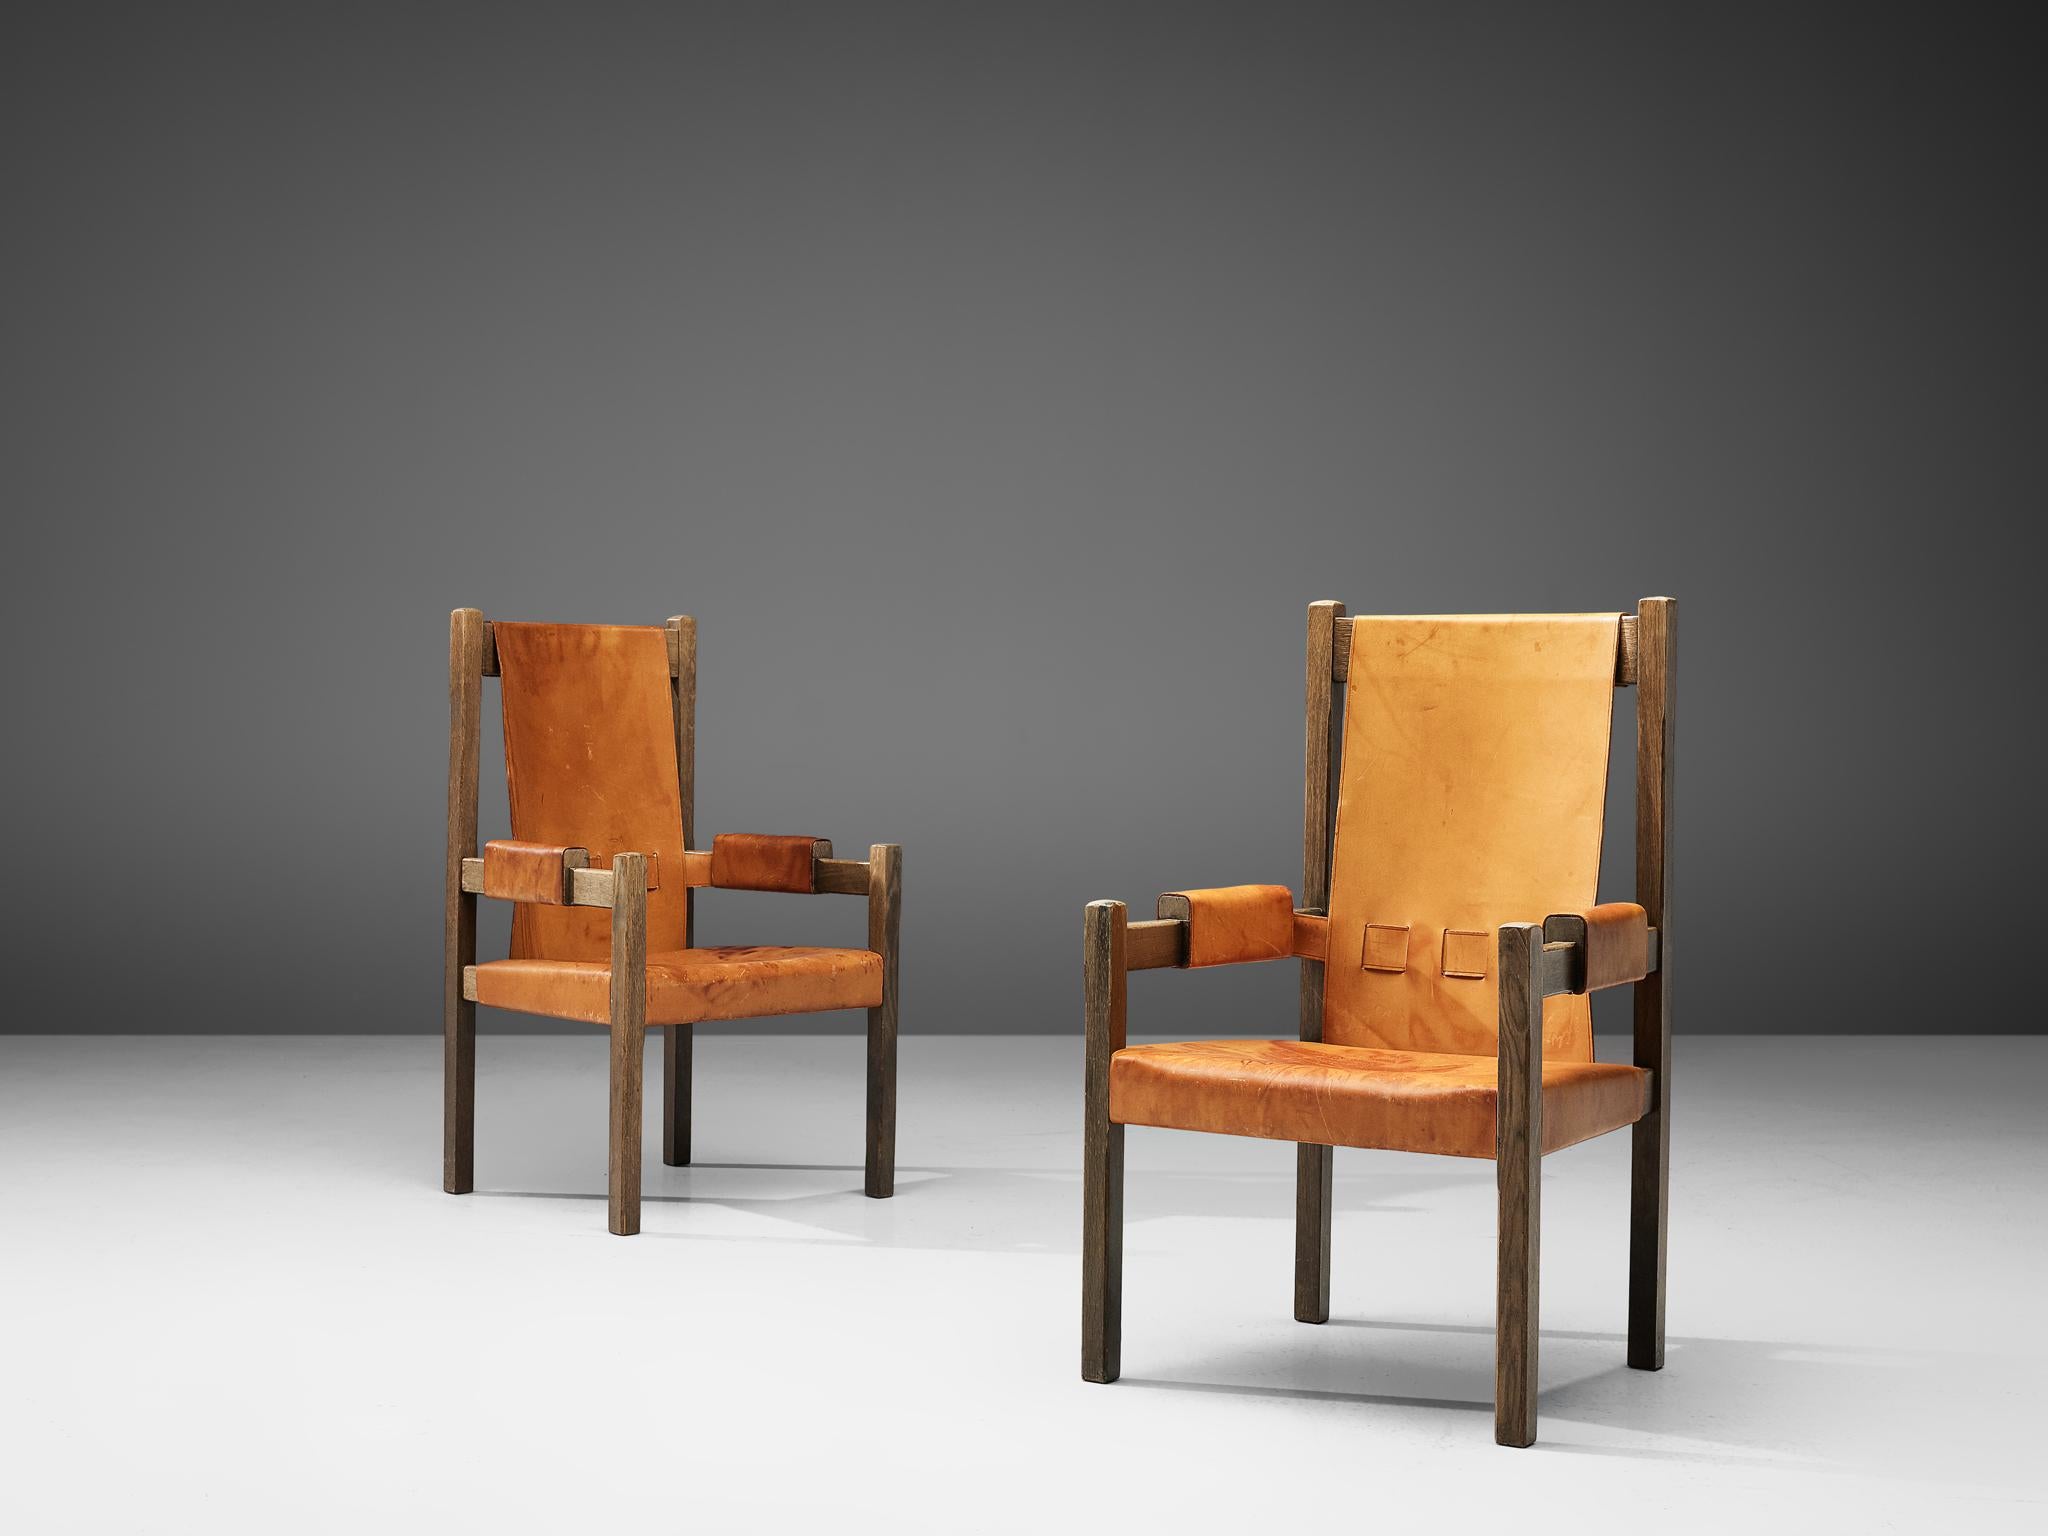 Pair of highback chairs, leather and wood, France, 1960s

Cognac leather armchairs with a highback and wooden fraes. Throne inspired design with angular shapes. The leather is strained on the seat and backrest, while the leather armrests are